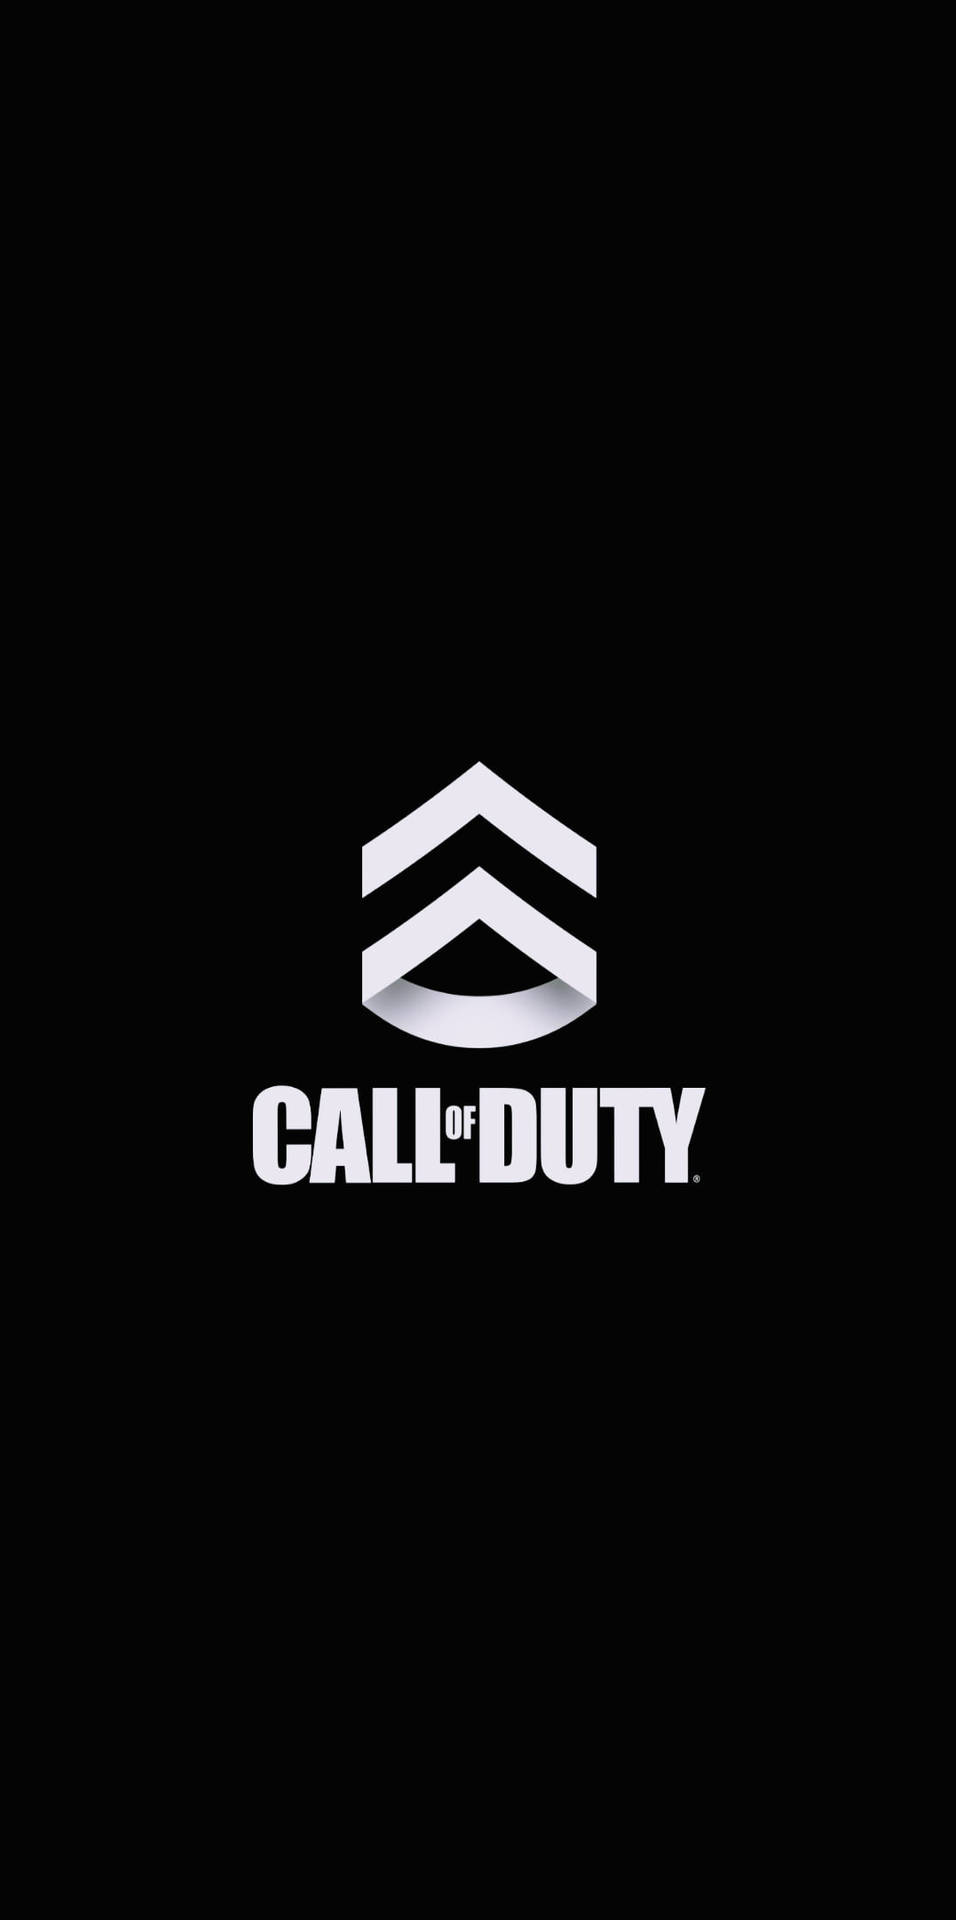 Call Of Duty Gaming Logo Background